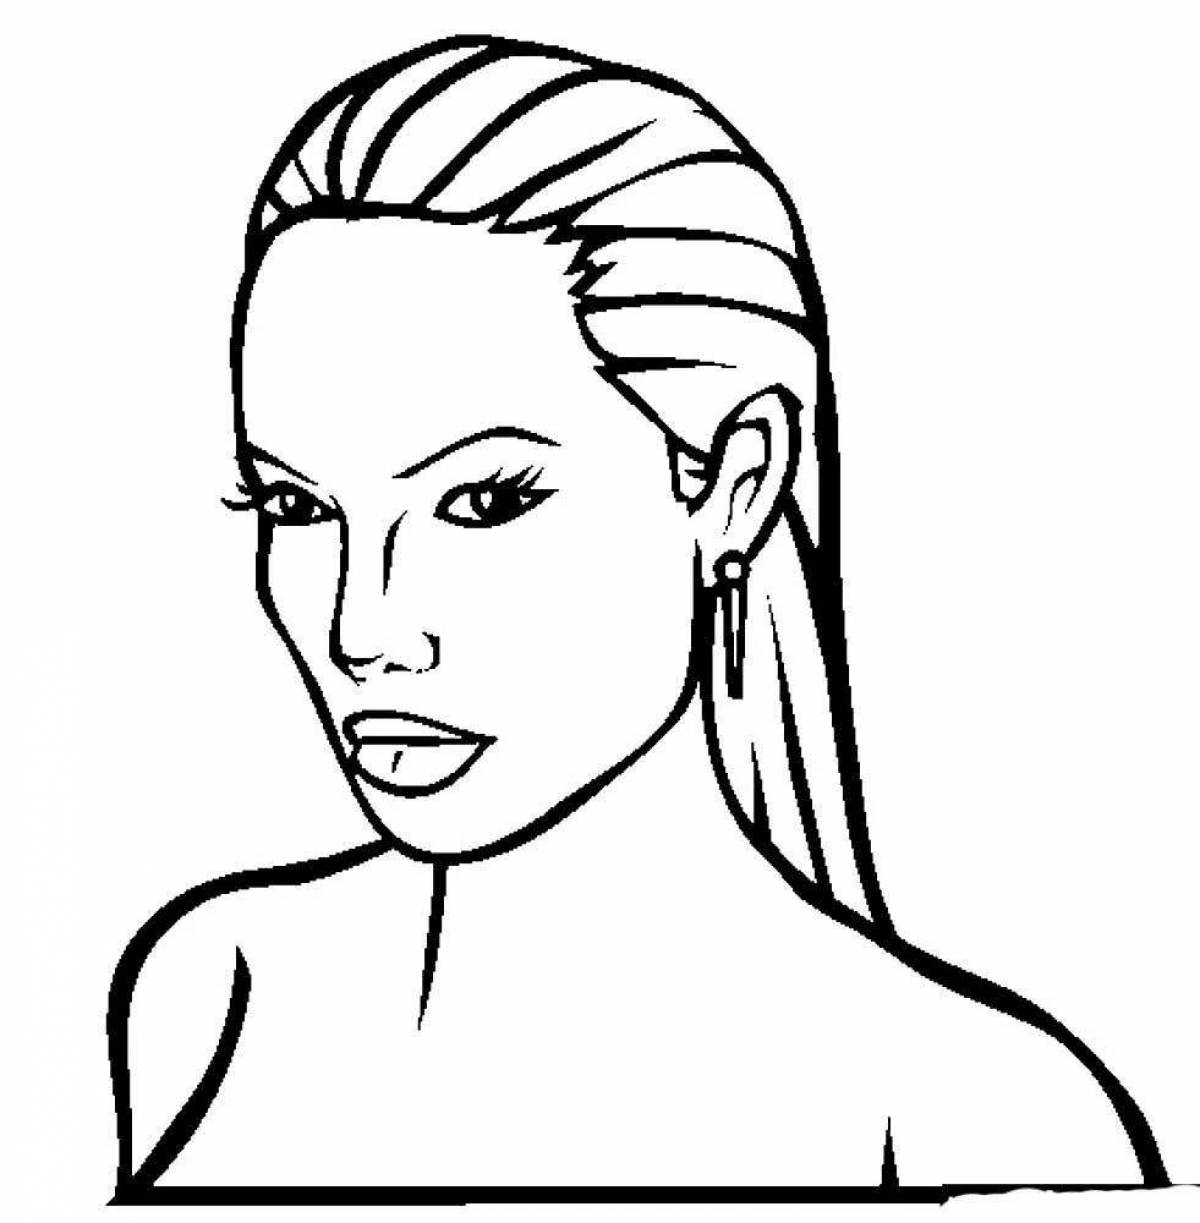 Colorful face coloring page